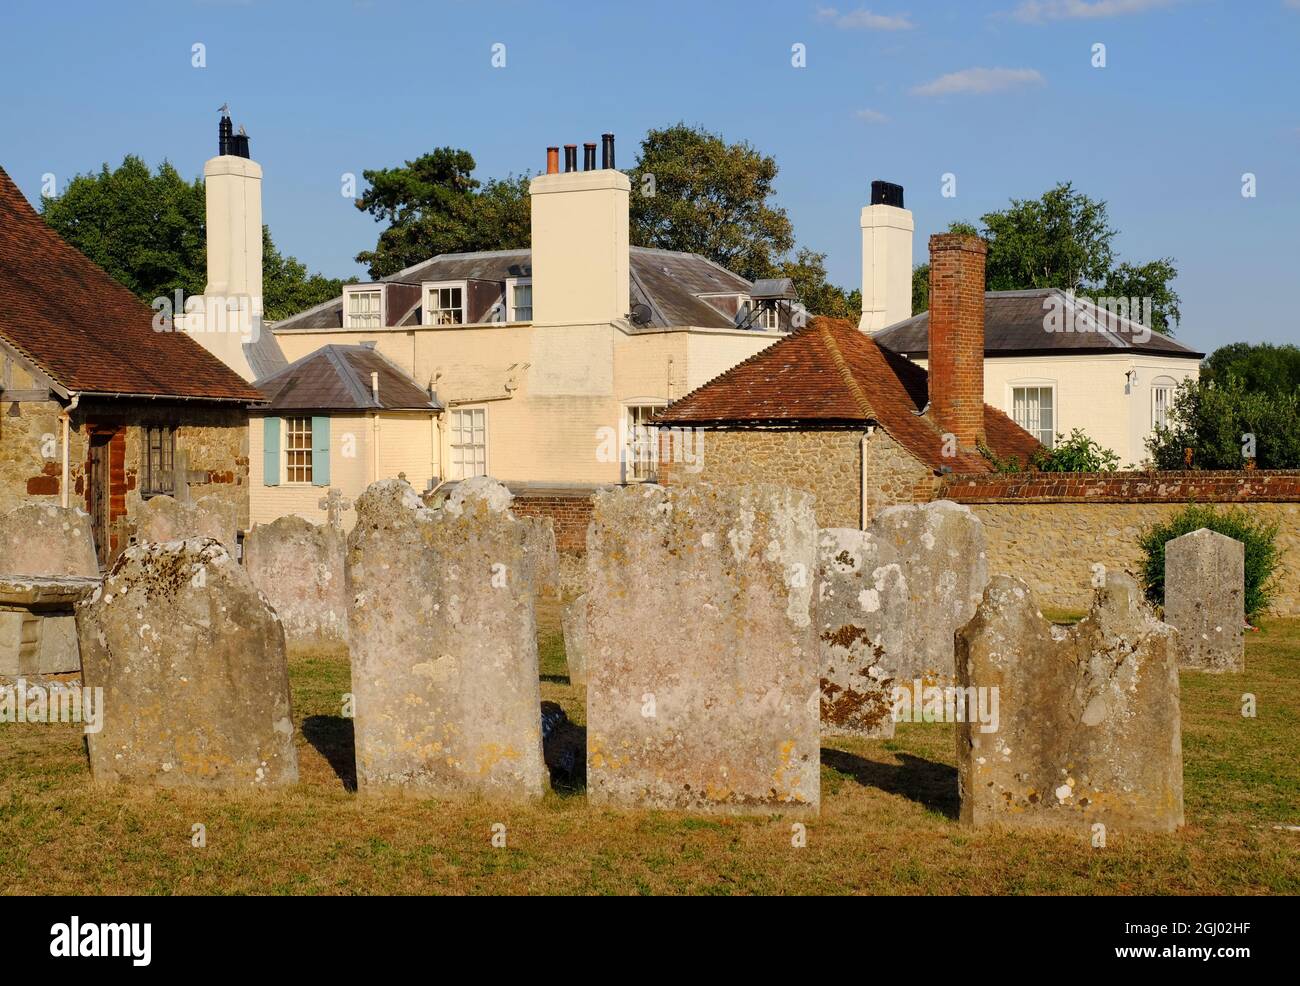 Gravestones in graveyard of Church of St Mary the Virgin and period house soon before sunset in West Malling, Kent, England Stock Photo